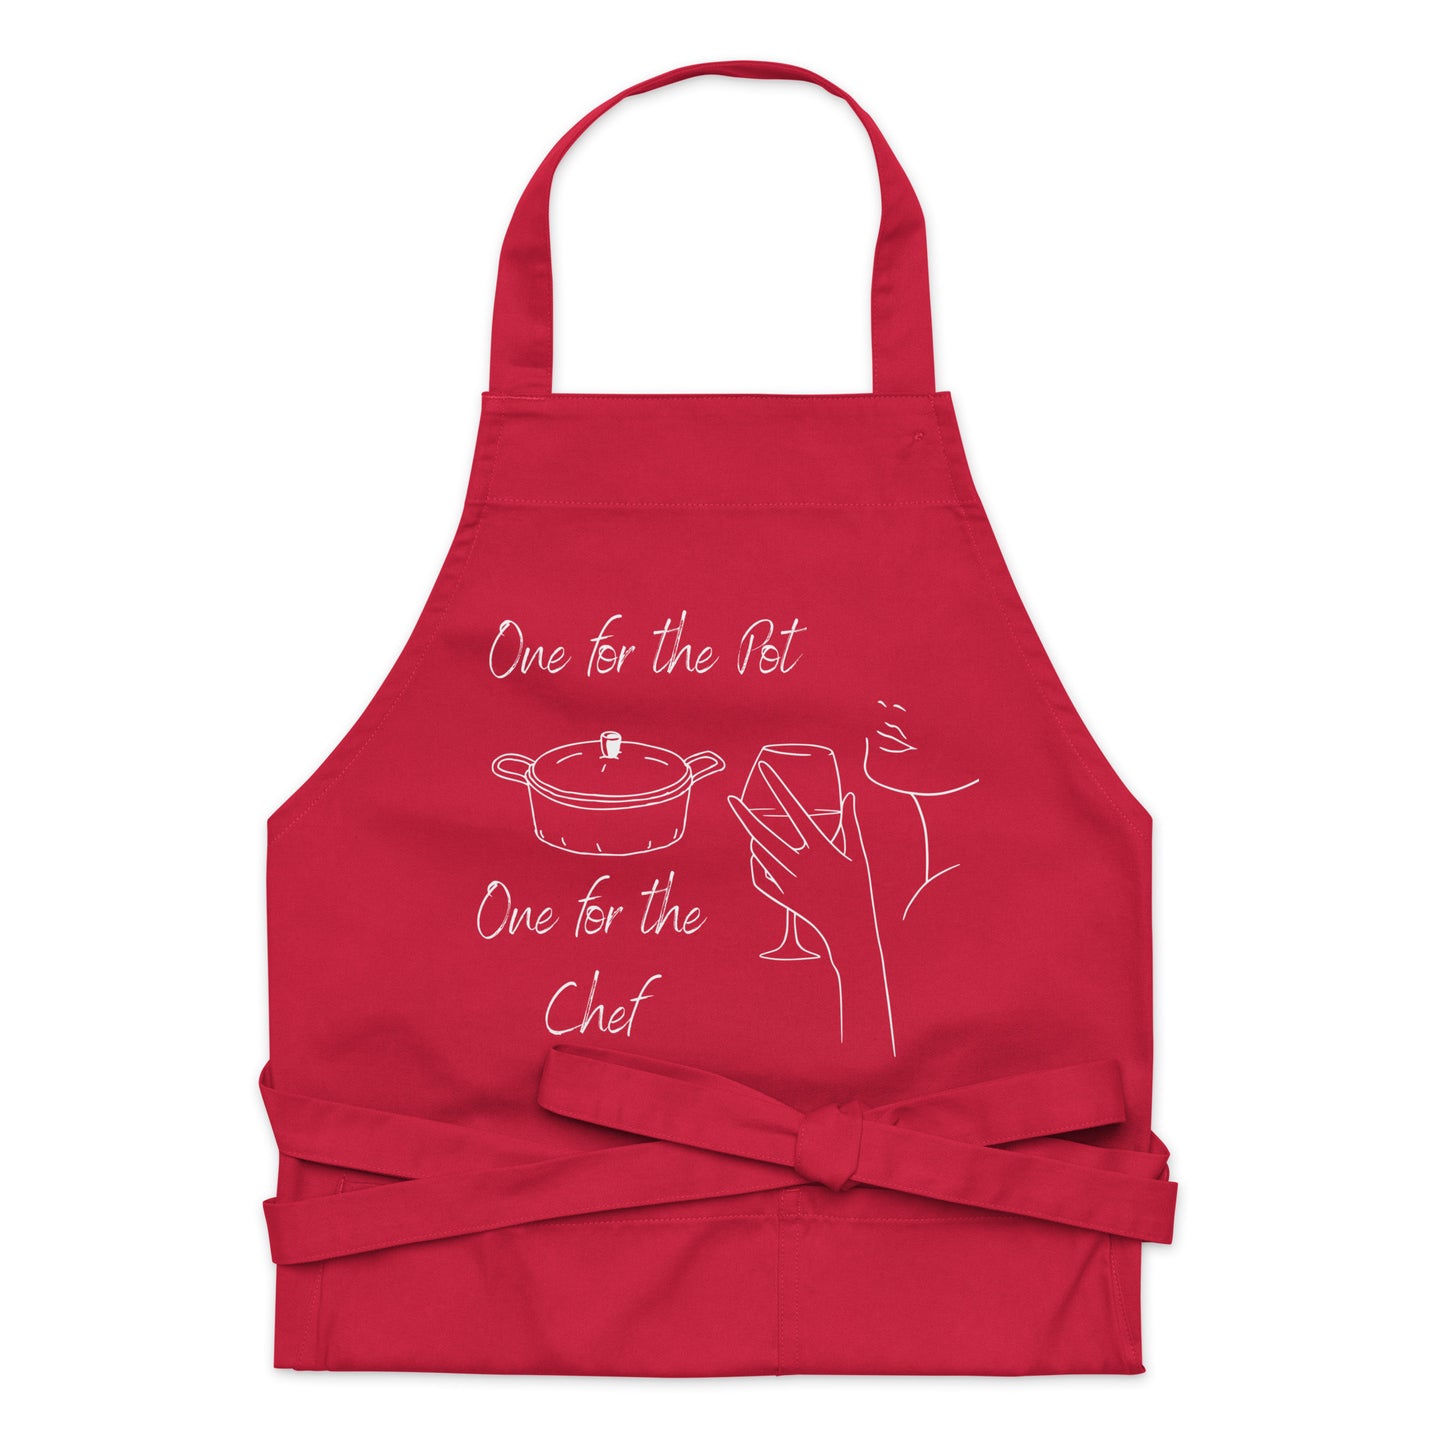 One for the Pot One for the Chef - Organic cotton apron